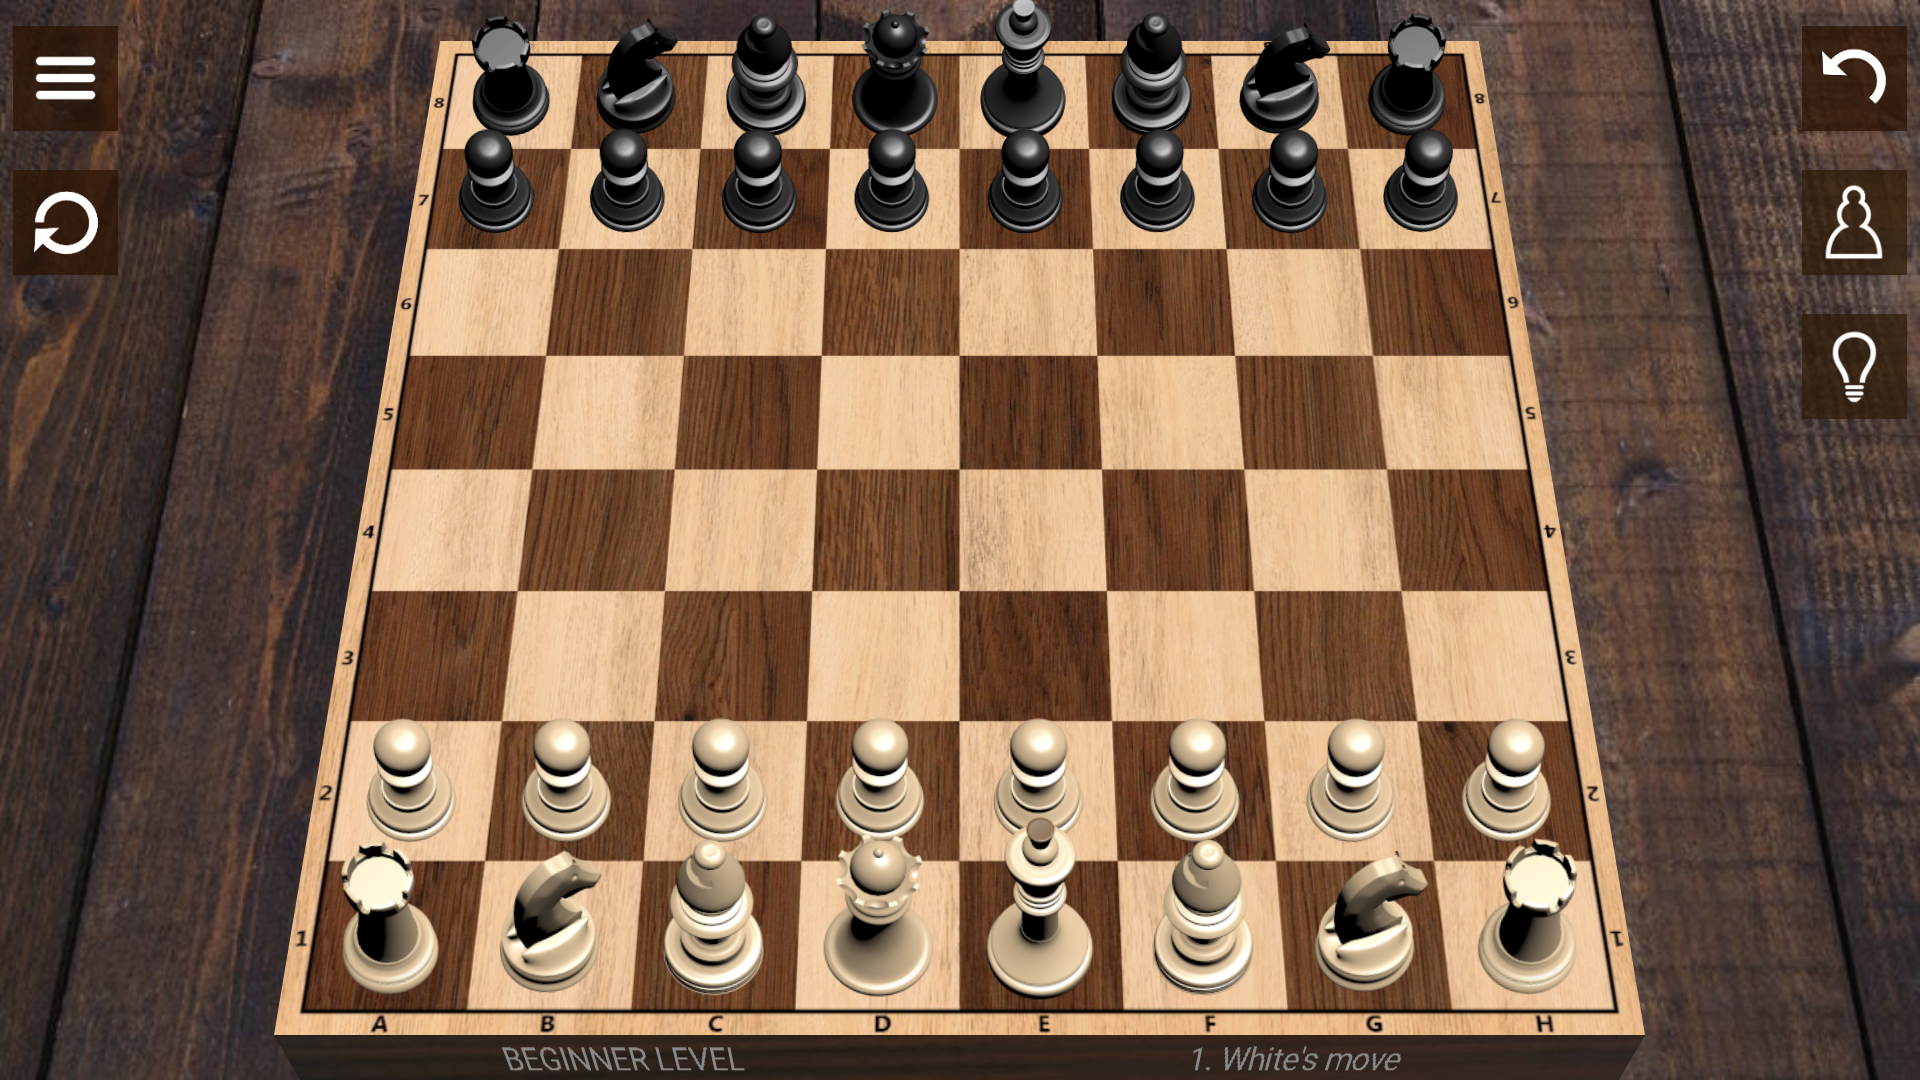 Play Chess Online